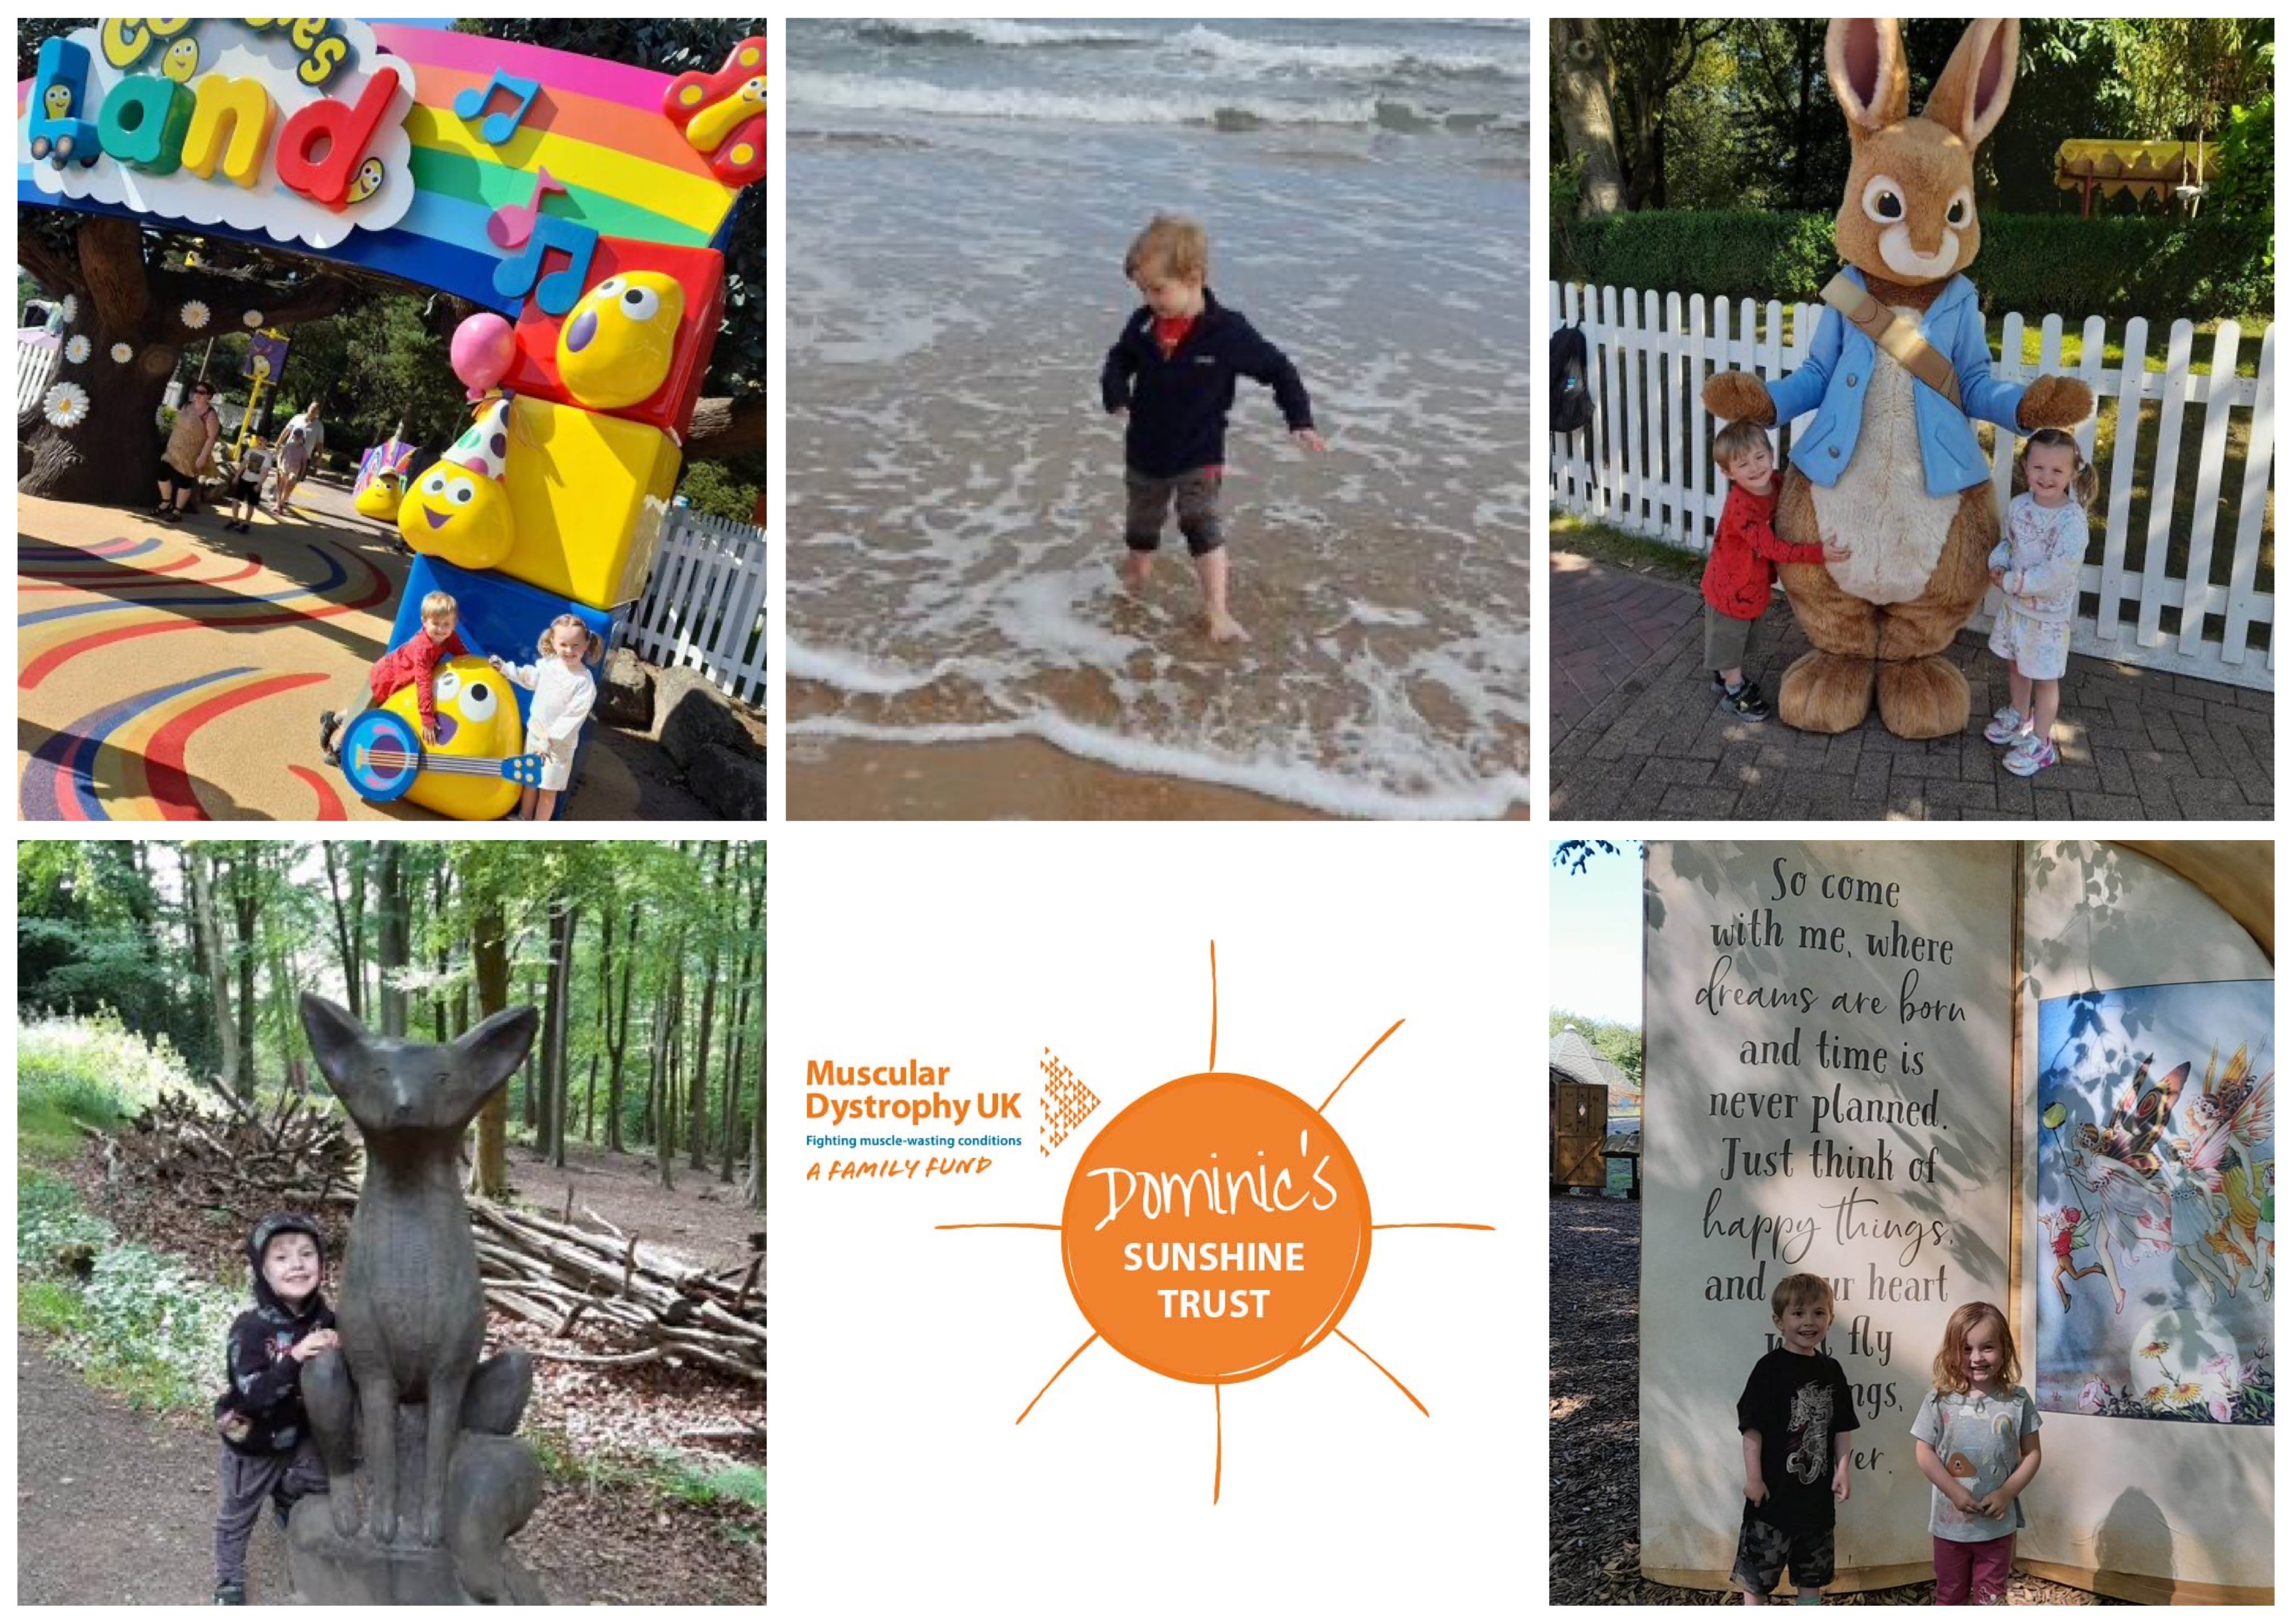 6 image collage. Images include Dominic and his sister by the Cbeebies Land entrance, Dominic in the sea, Dominic and his sister with Peter Rabbit, Dominic stood by a wooden fox carving and an image of the Dominic's Sunshine Trust logo